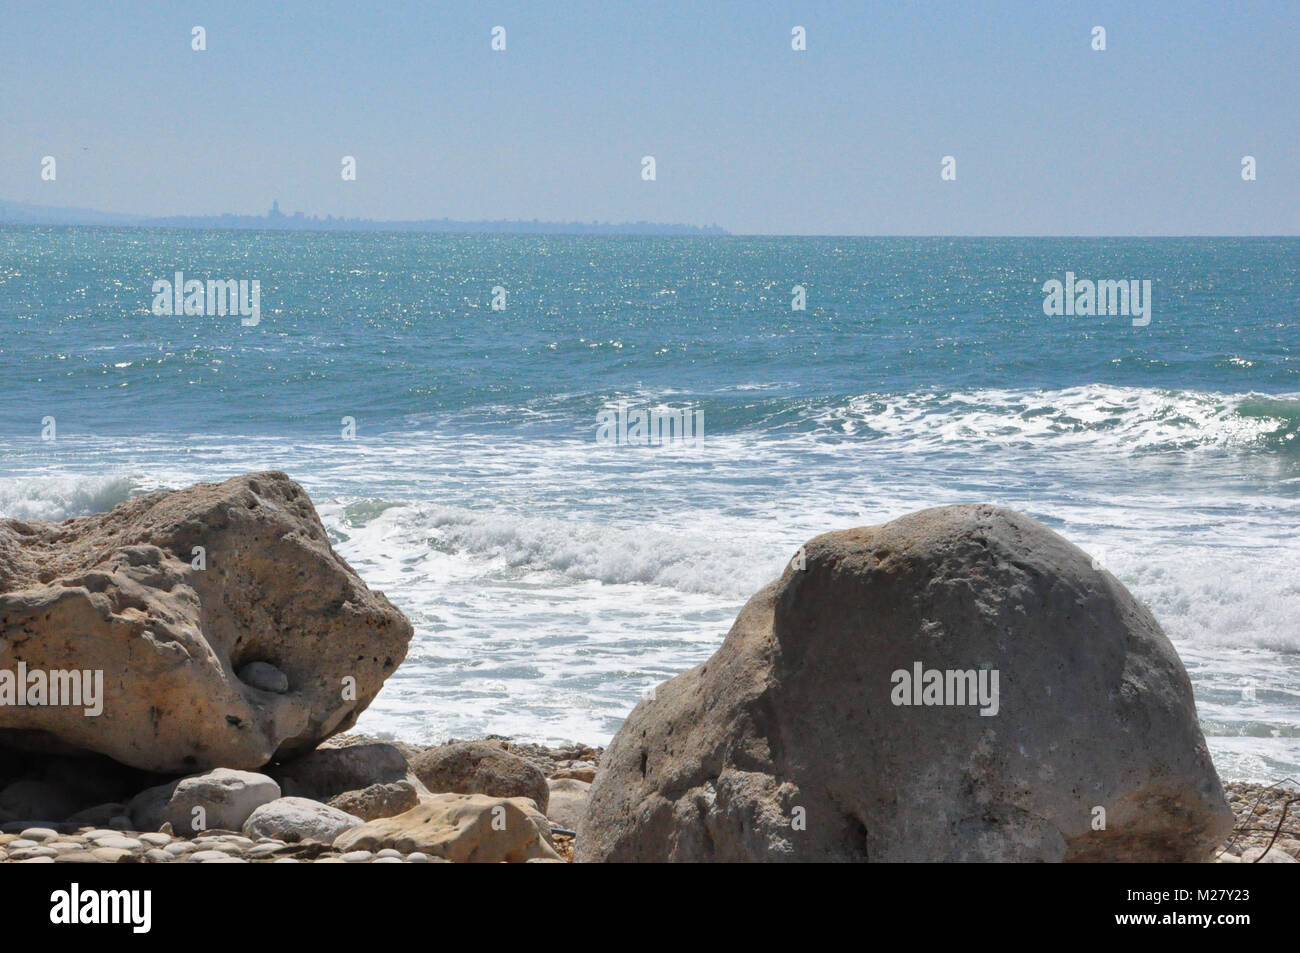 Beirut in the distance seen from rocky shore Stock Photo